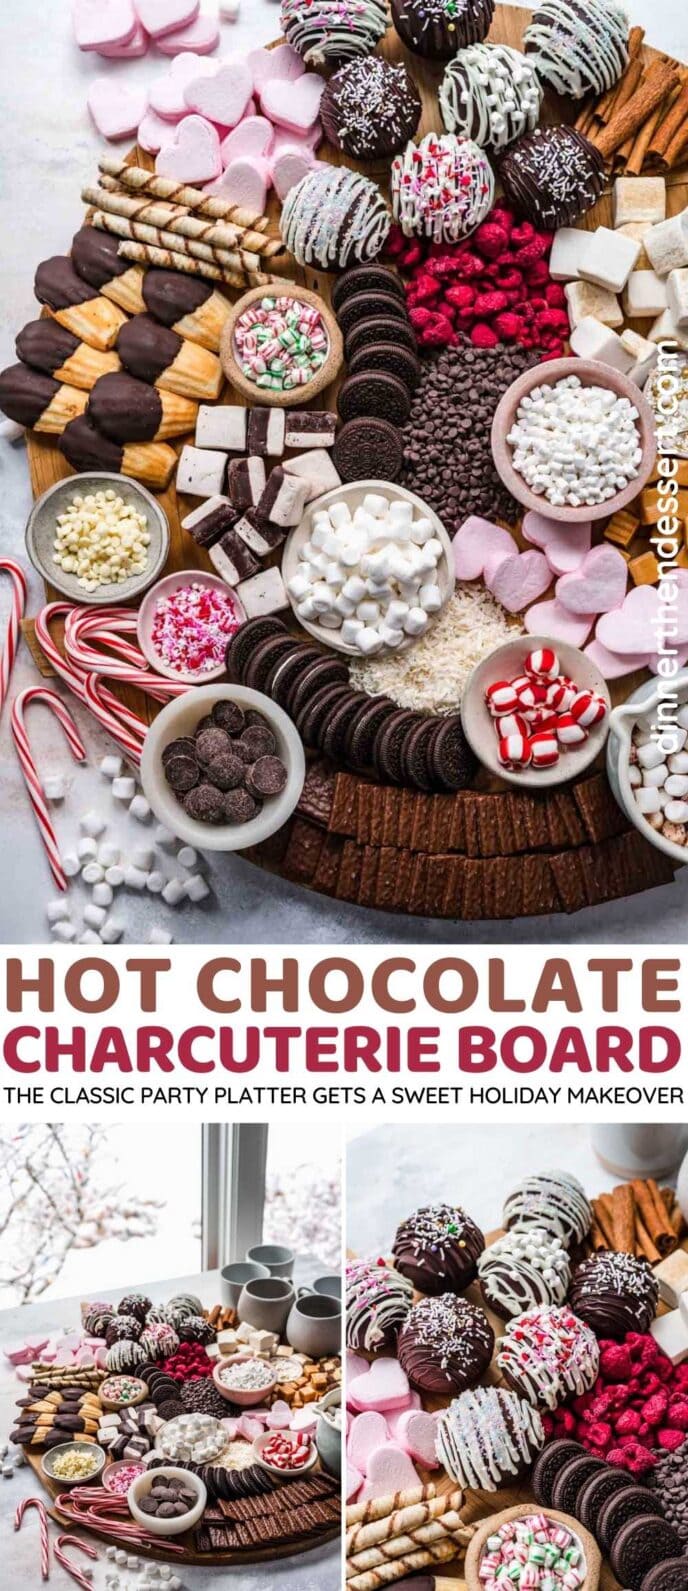 Hot Chocolate Charcuterie Board collage